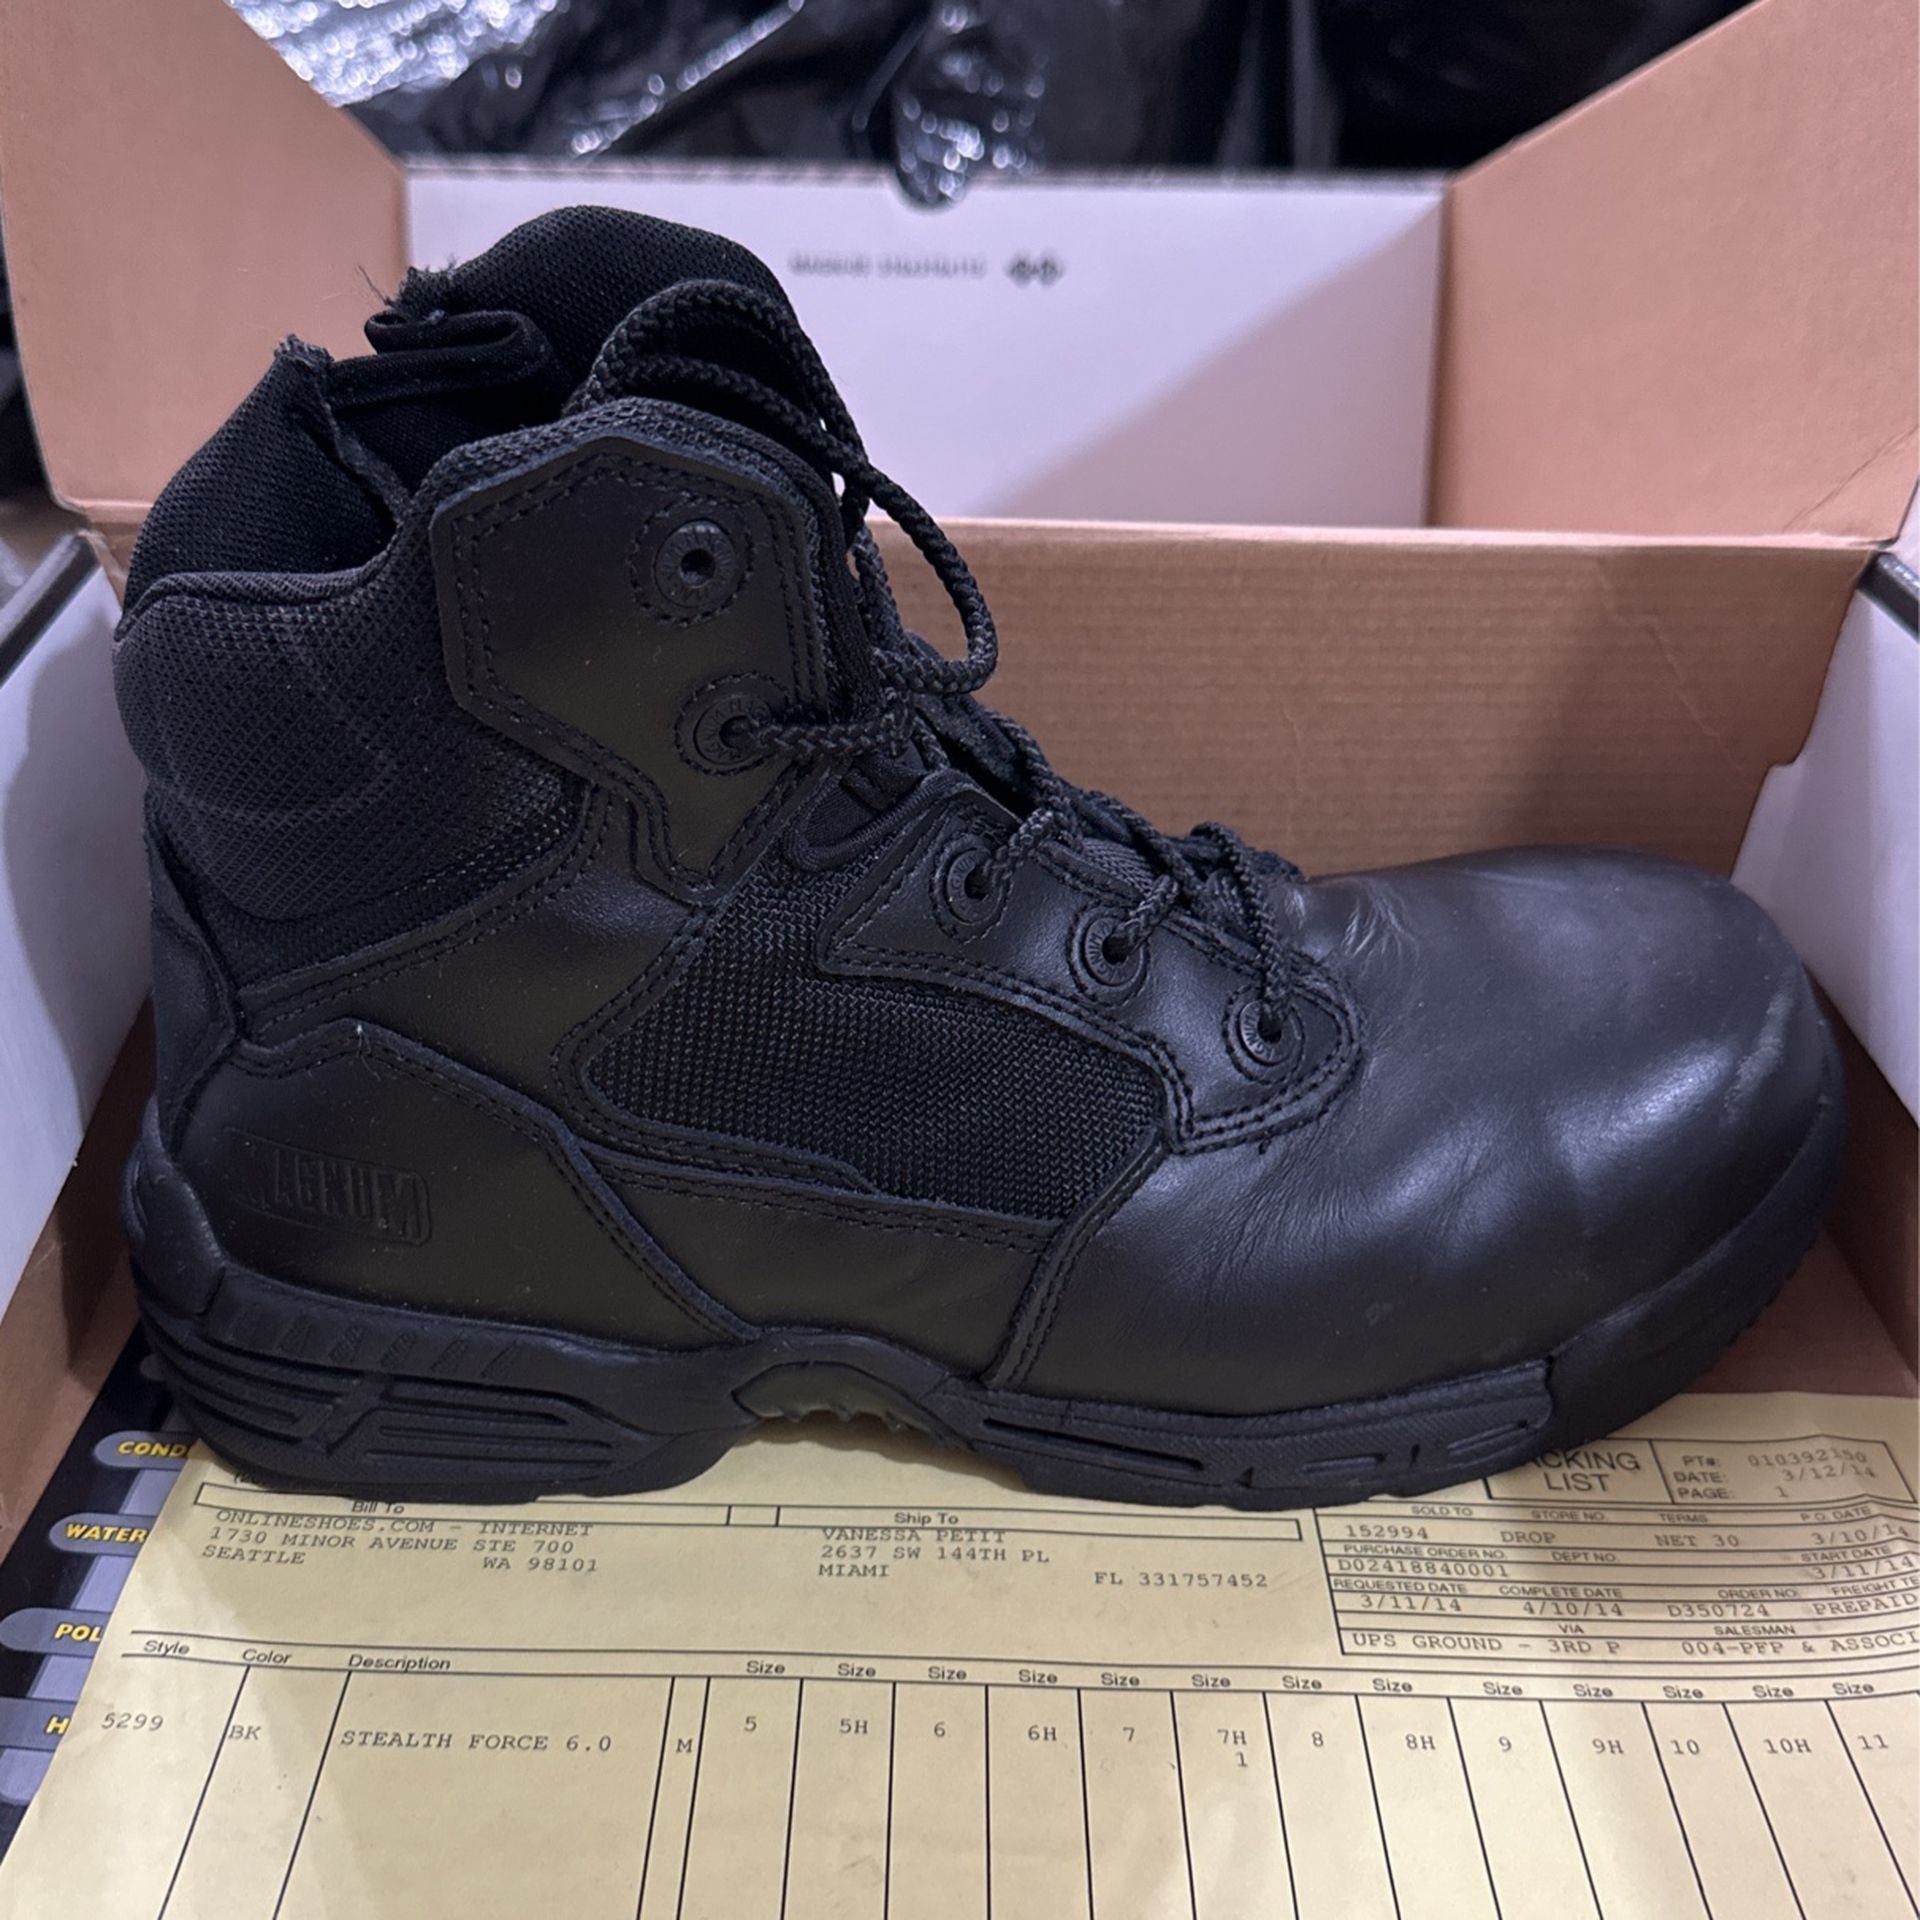 Magnum Stealth Force 6.0 Boots 7.5